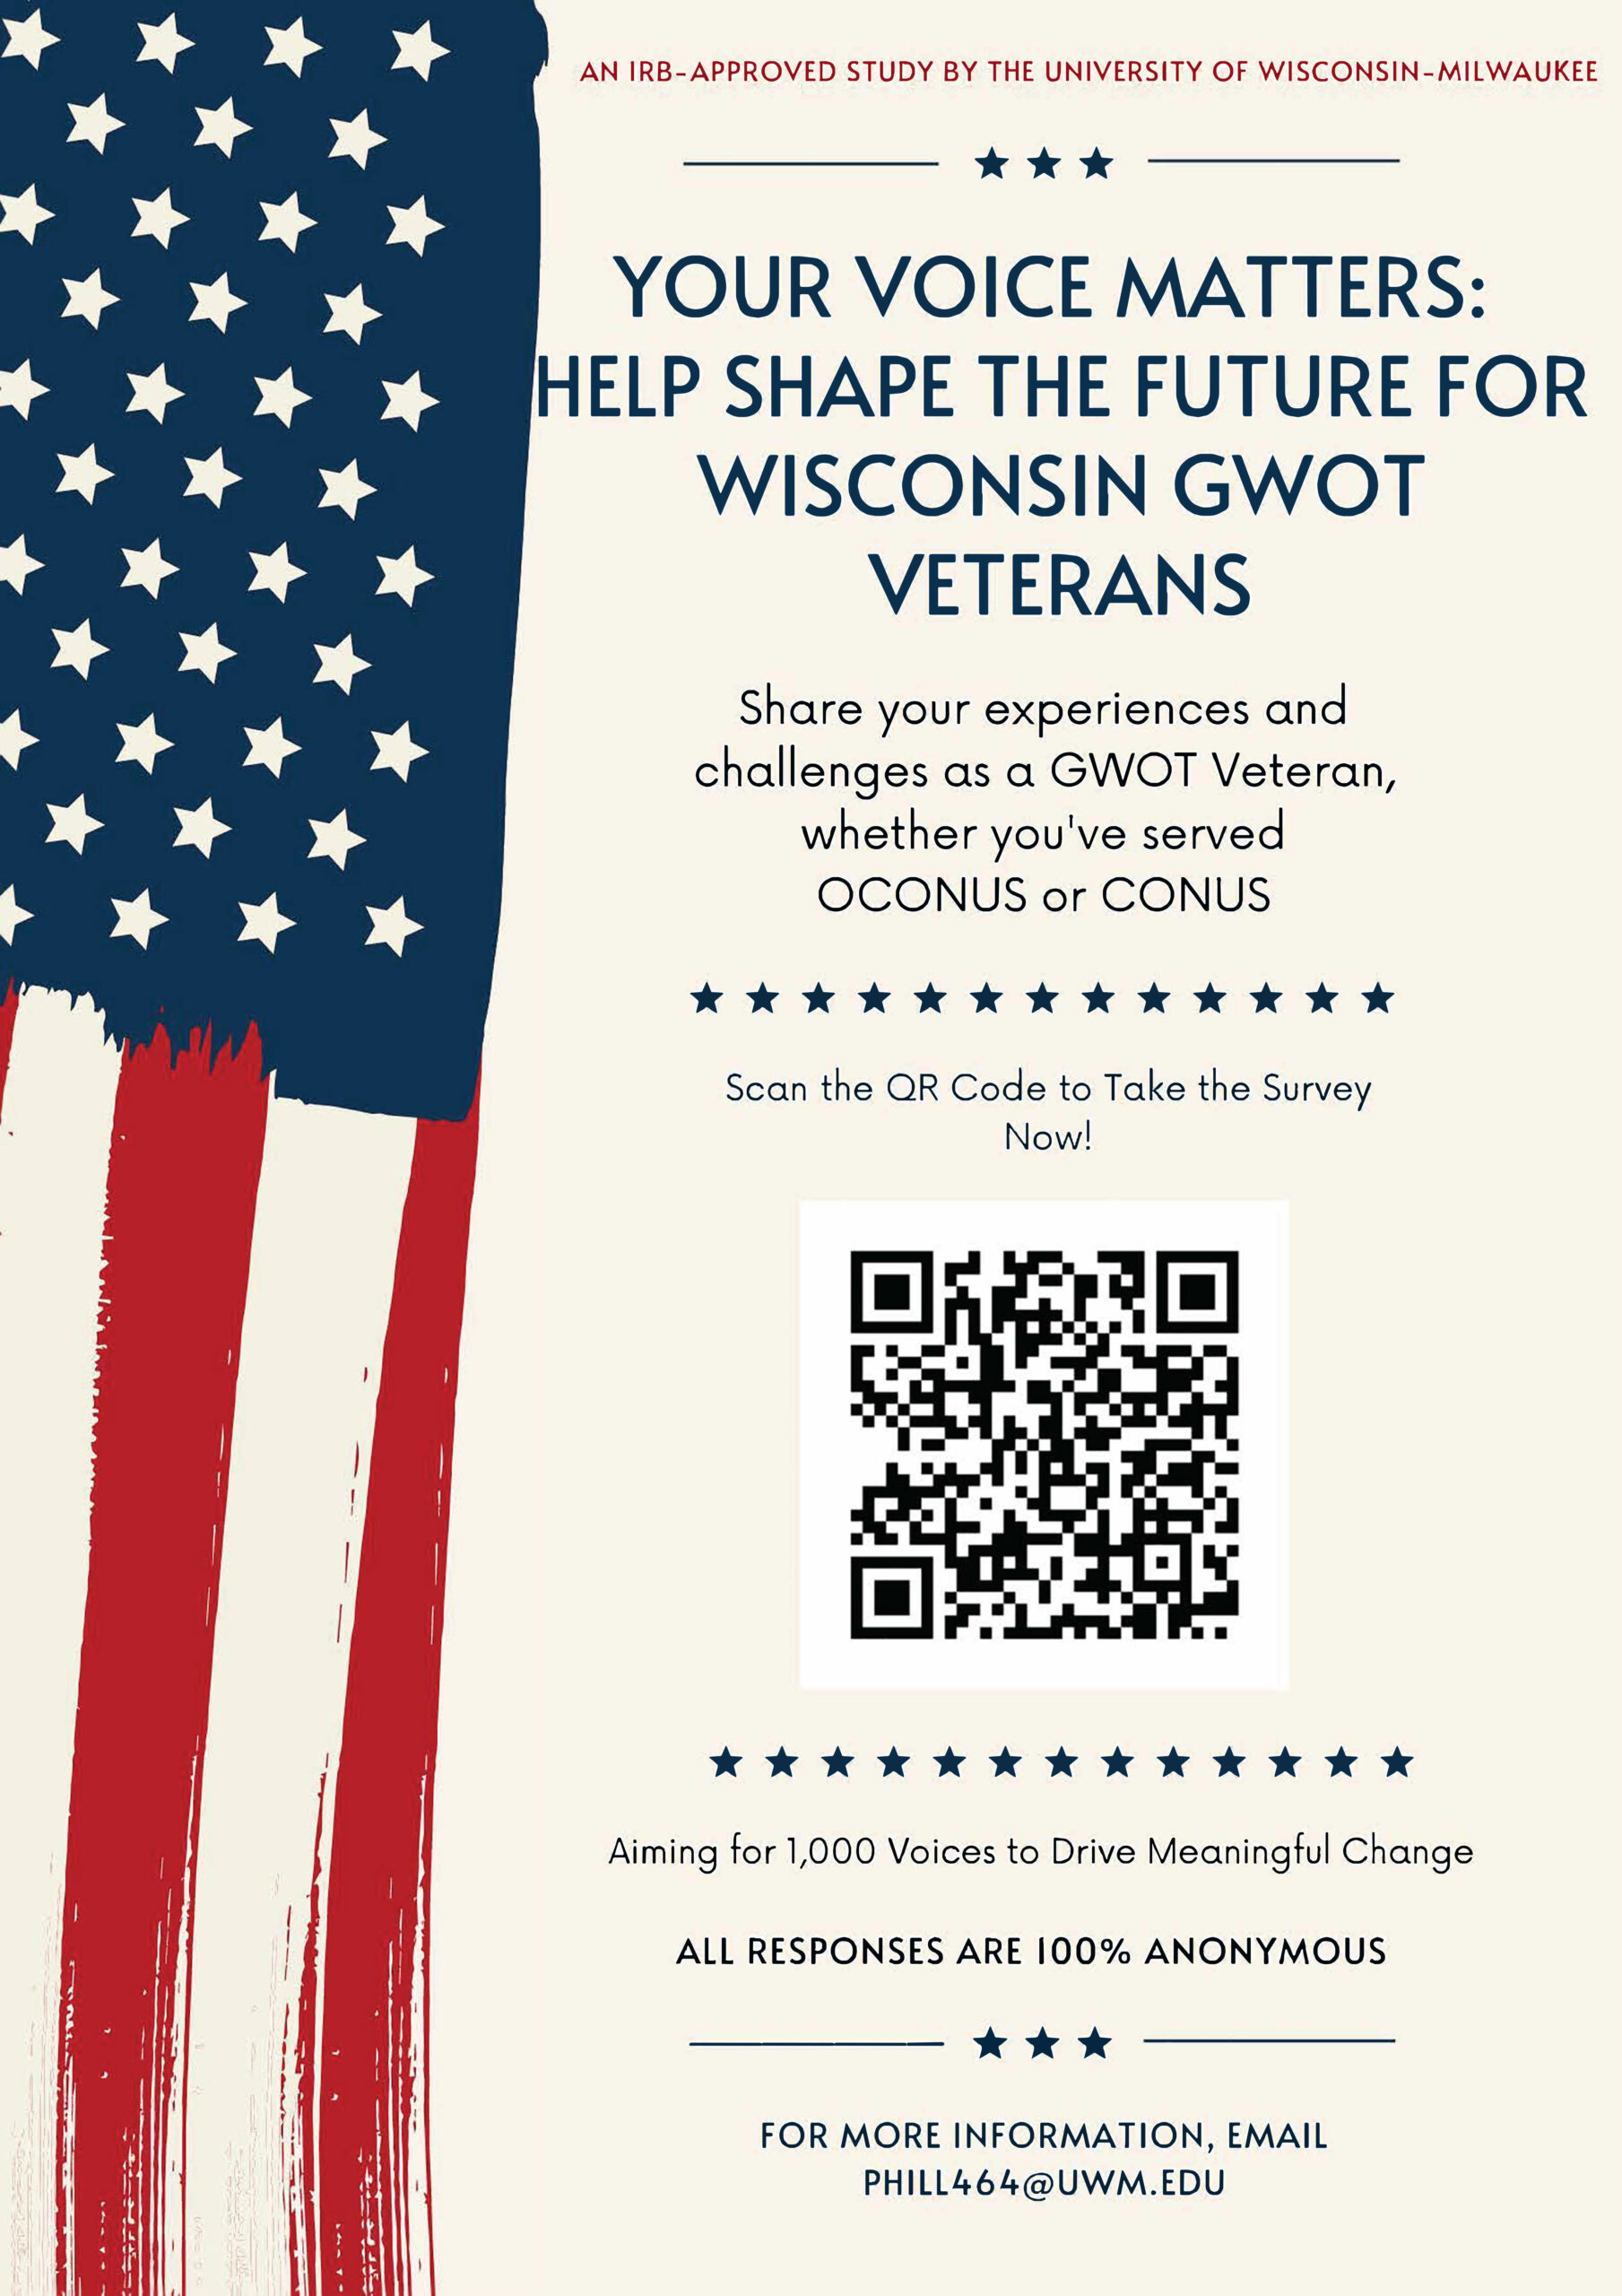 Research: Your Voice Matters: Help Shape The Future For Wisconsin GWOT Veterans